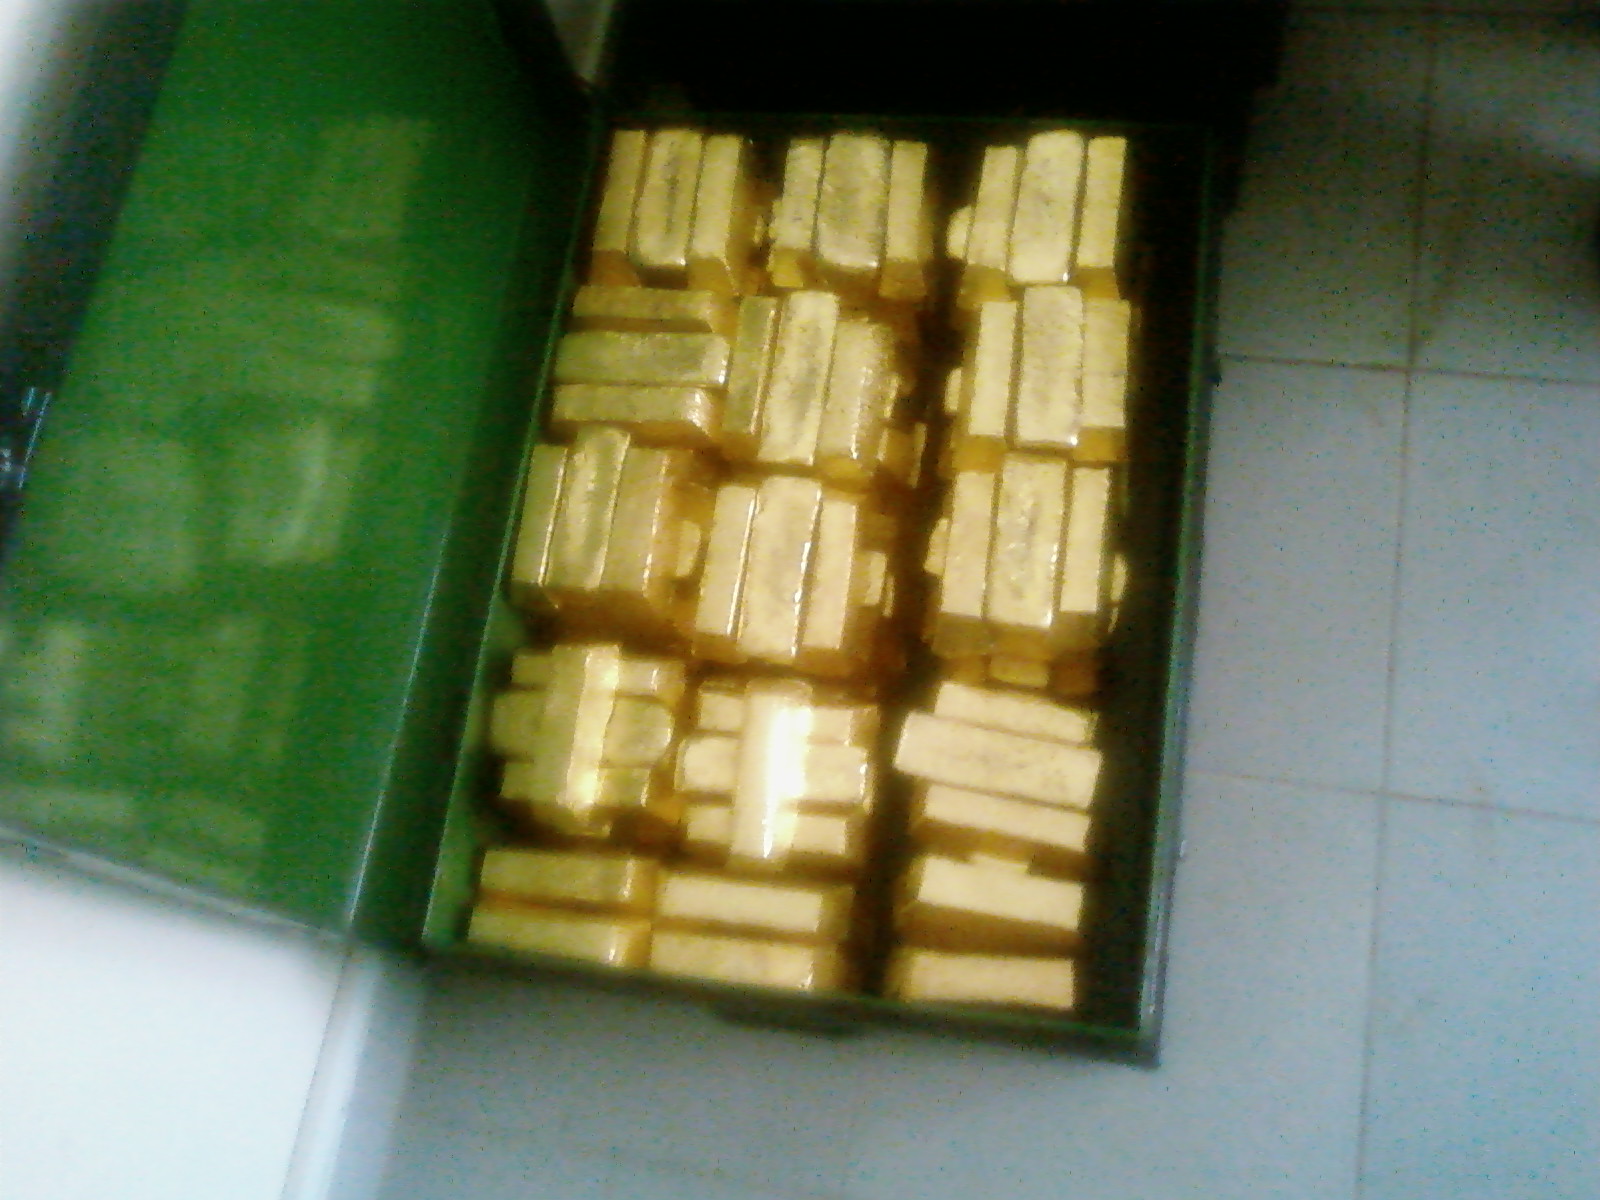 Sell Au gold bars, gold dust, gold nugets, silver and rough uncut diamonds